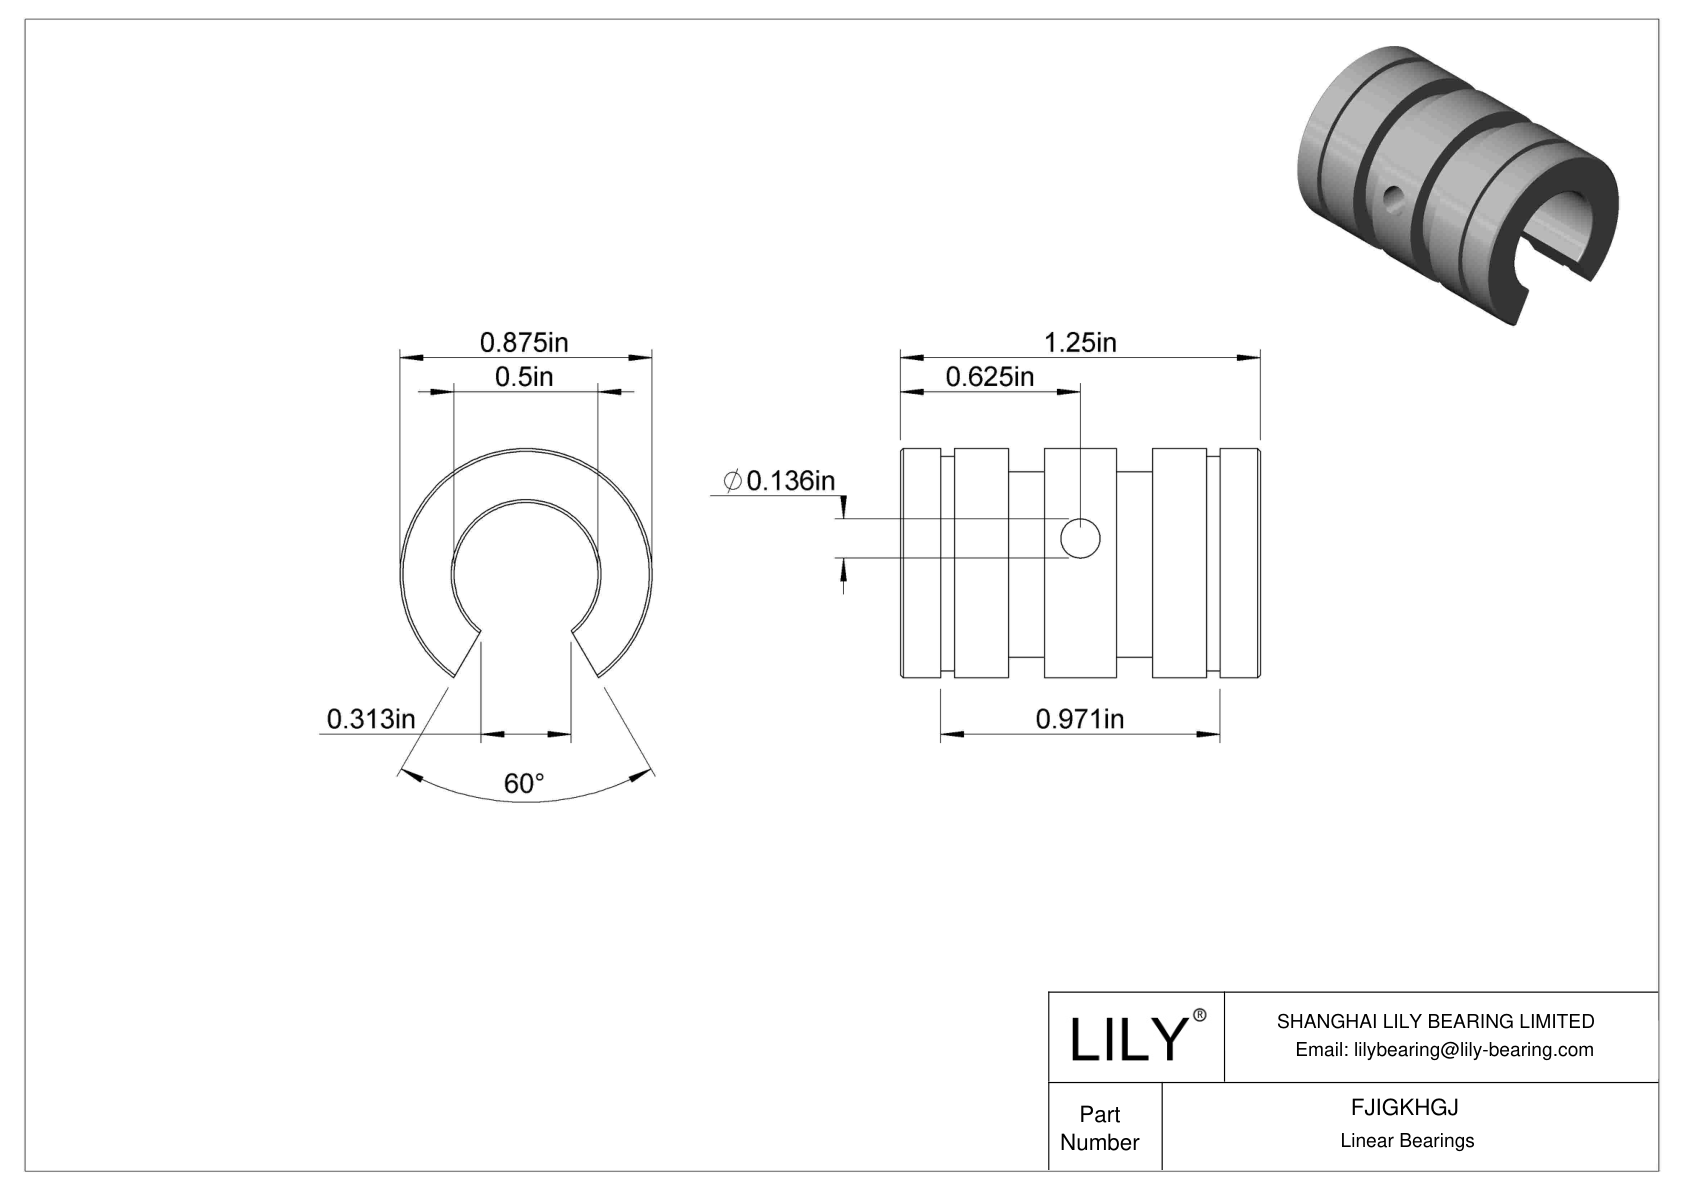 FJIGKHGJ Common Linear Sleeve Bearings for Support Rail Shafts cad drawing